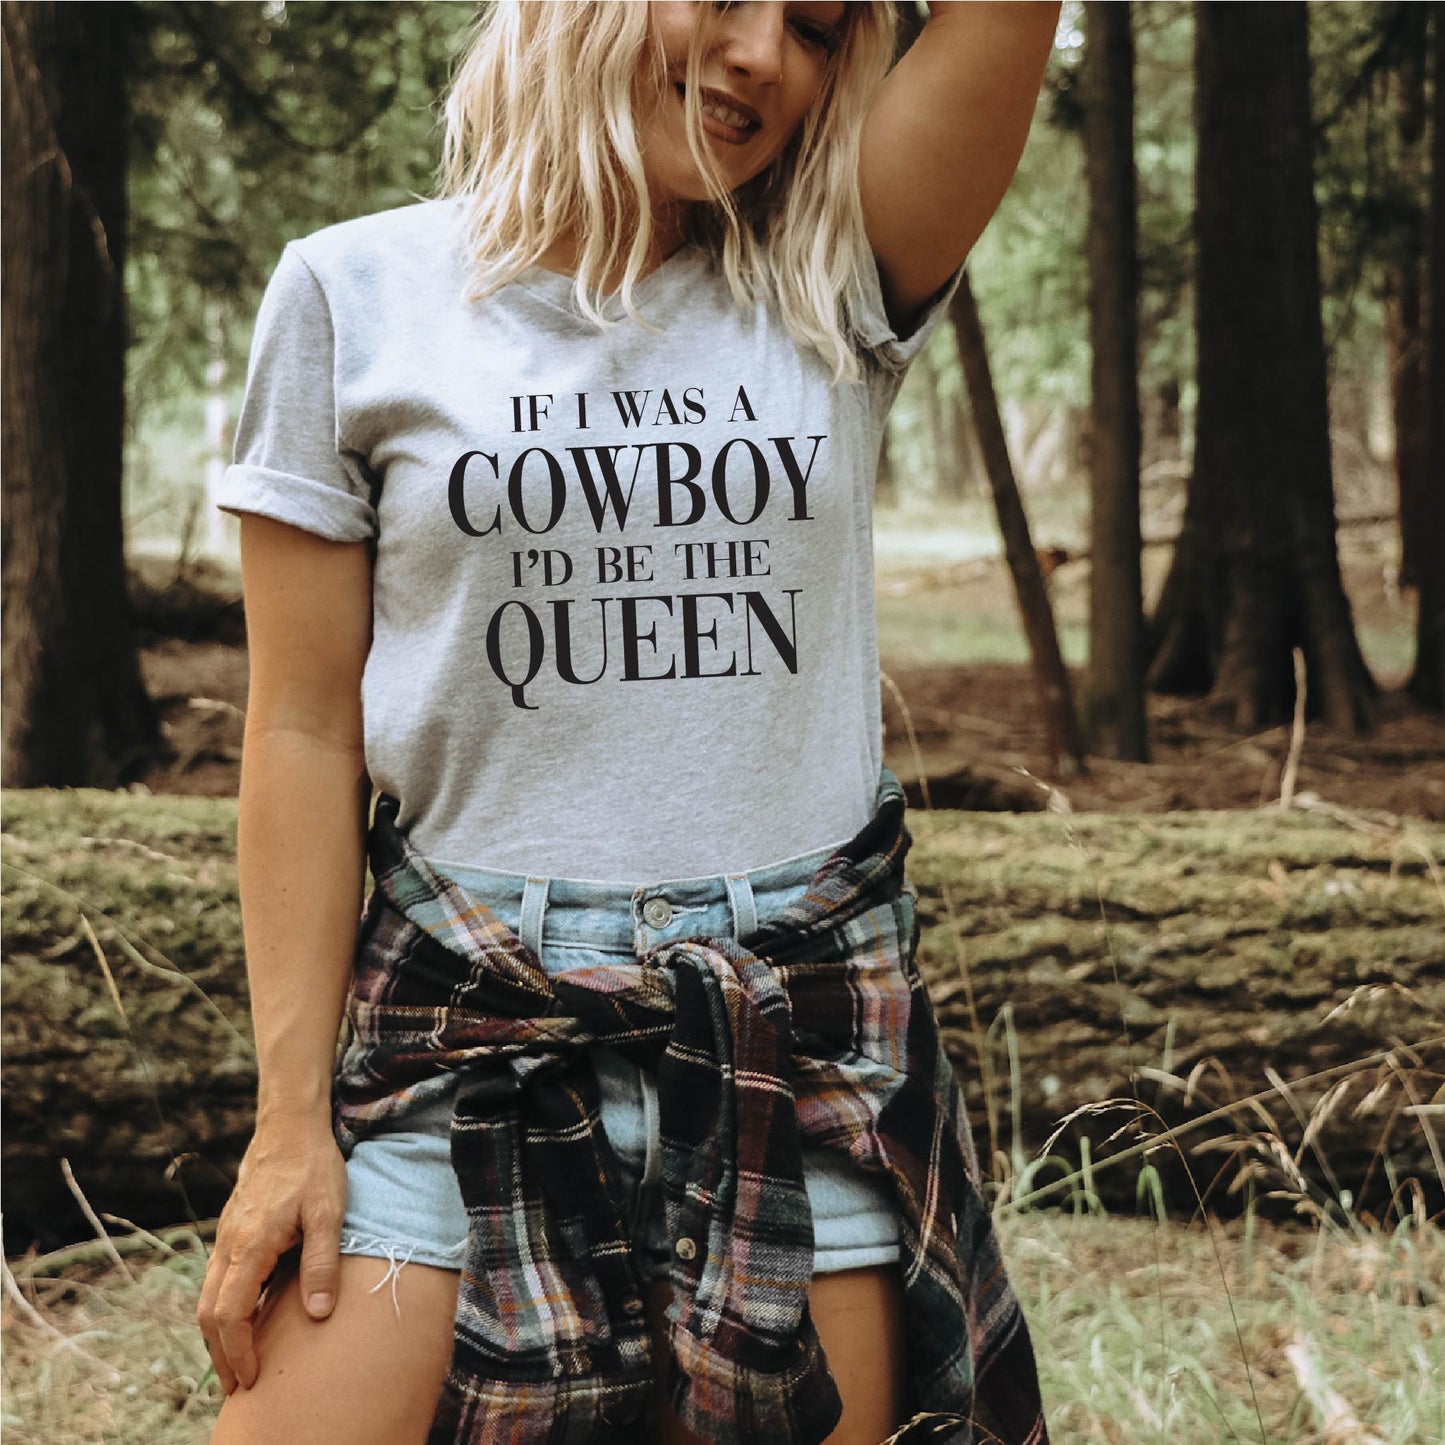 If I was a Cowboy I'd be the Queen